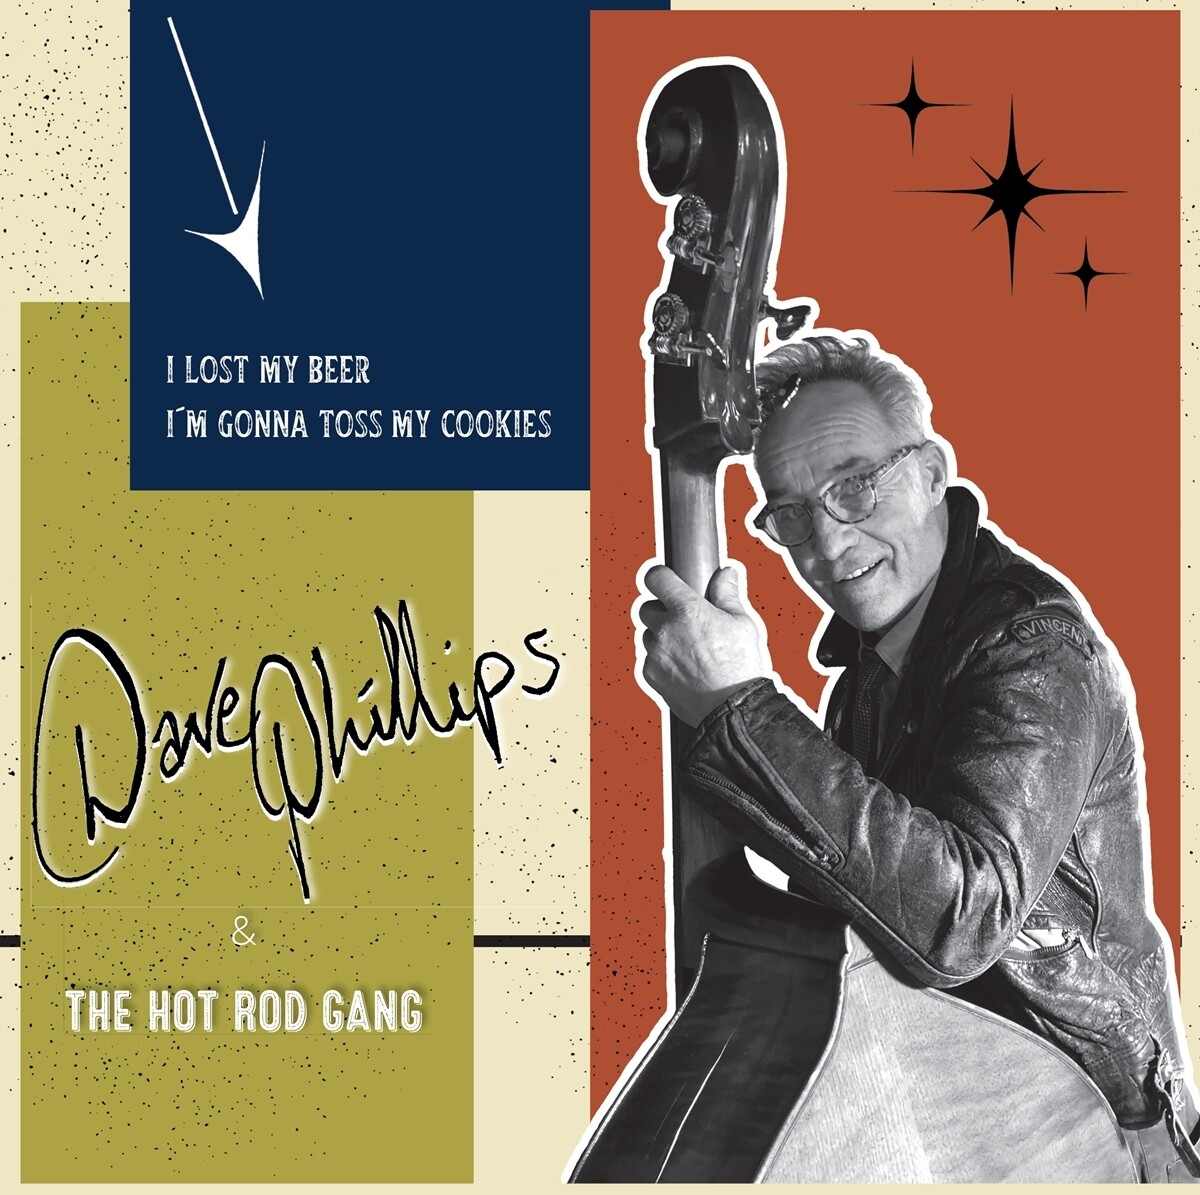 Dave Phillips & the Hot Rod Gang
"I Lost My Beer / I'm Gonna Toss My Cookies"